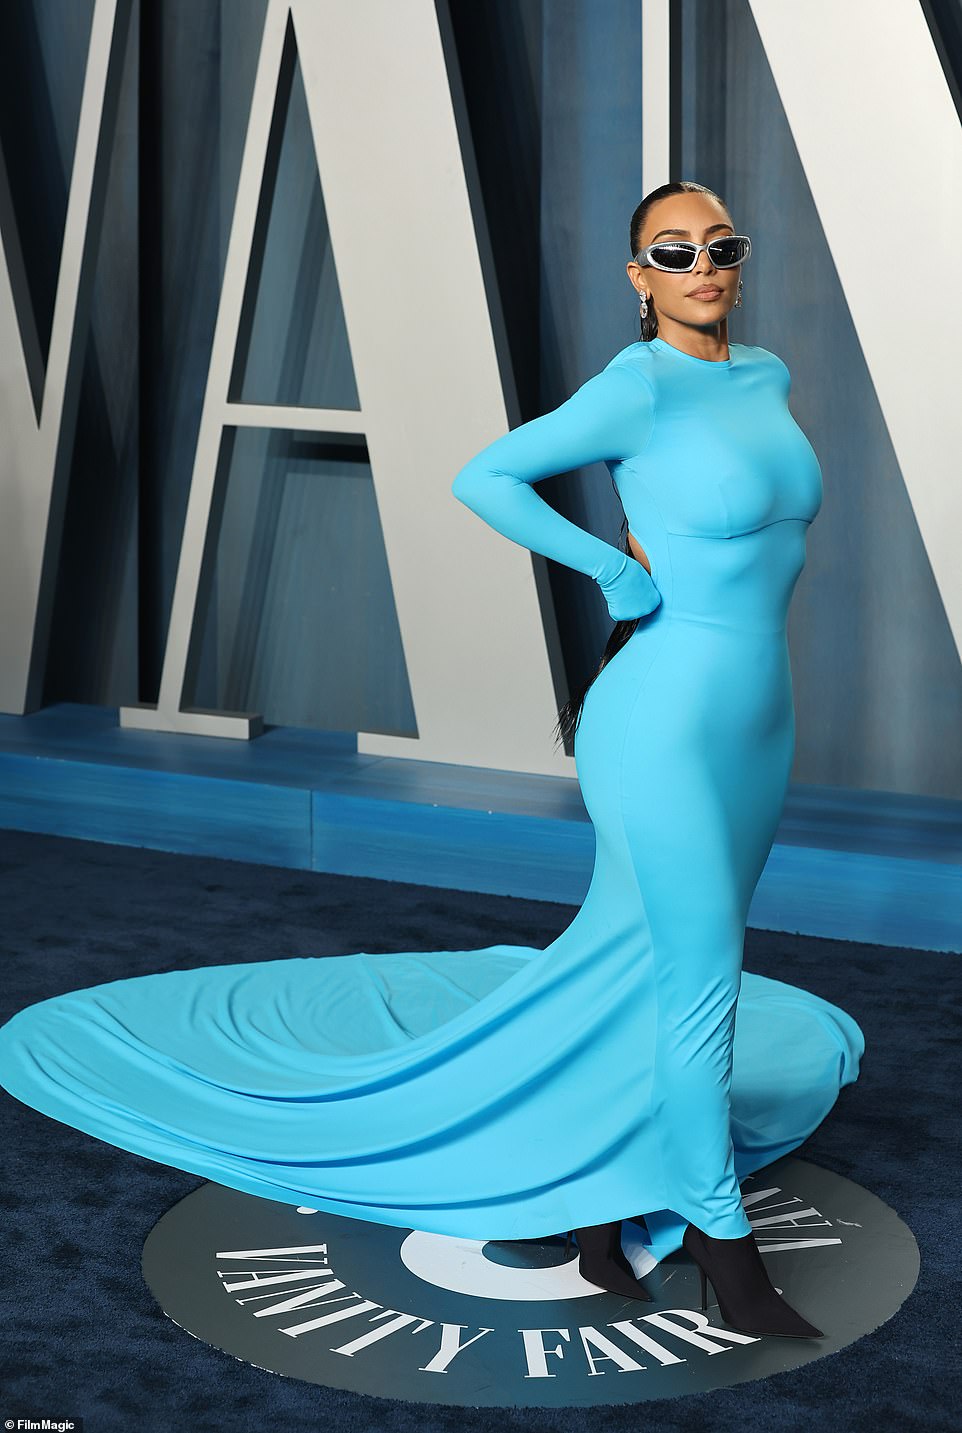 Breathtaking in blue!  Kim Kardashian put her iconic curves front and center as she mingled with Hollywood royalty at the 2022 Vanity Fair Oscar Party.